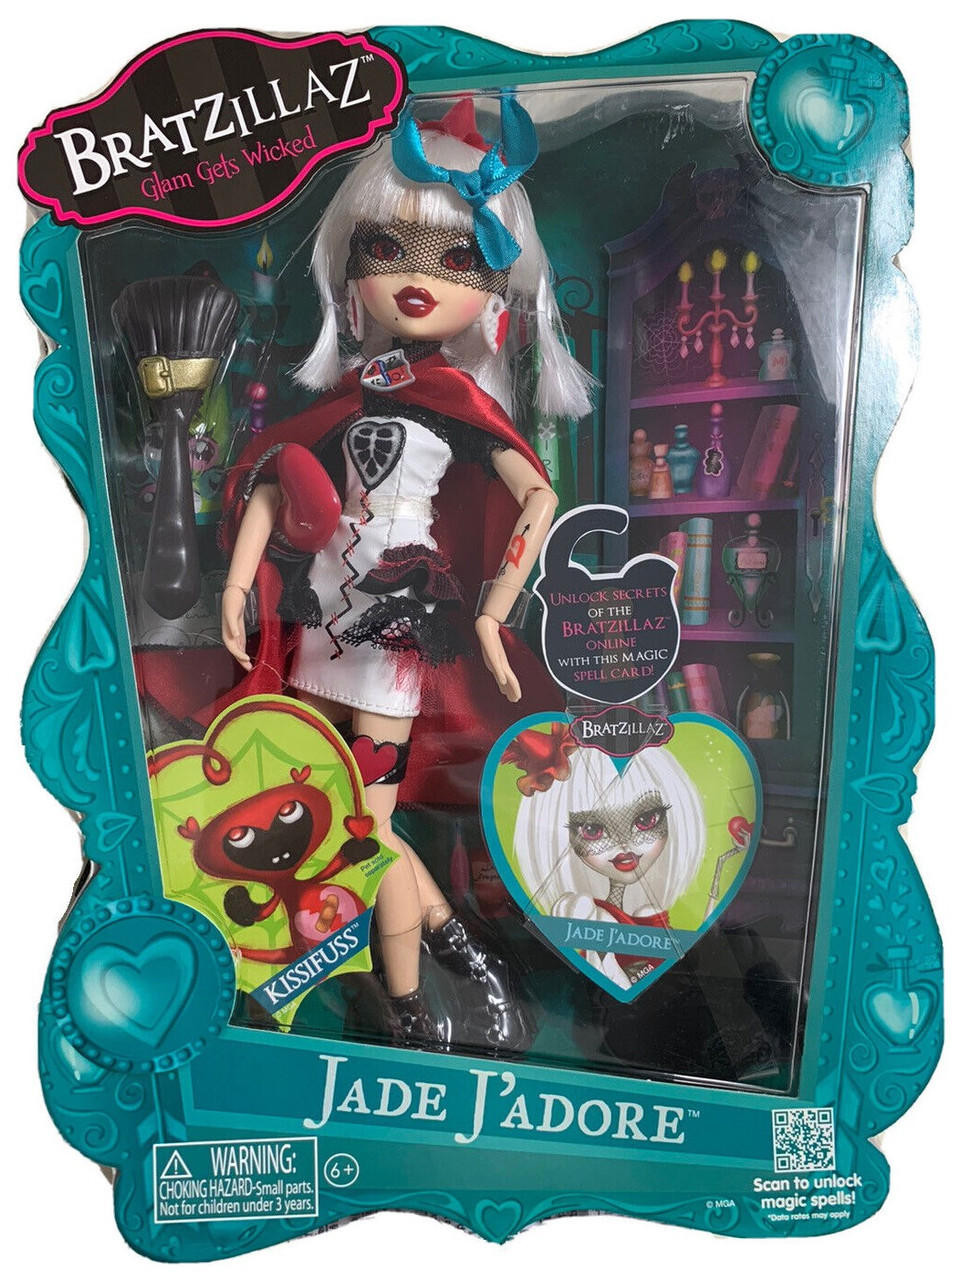 Bratzillaz Glam Gets Wicked Jade J'Adore Doll 2012 MGA Entertainment  514879E4C - We-R-Toys